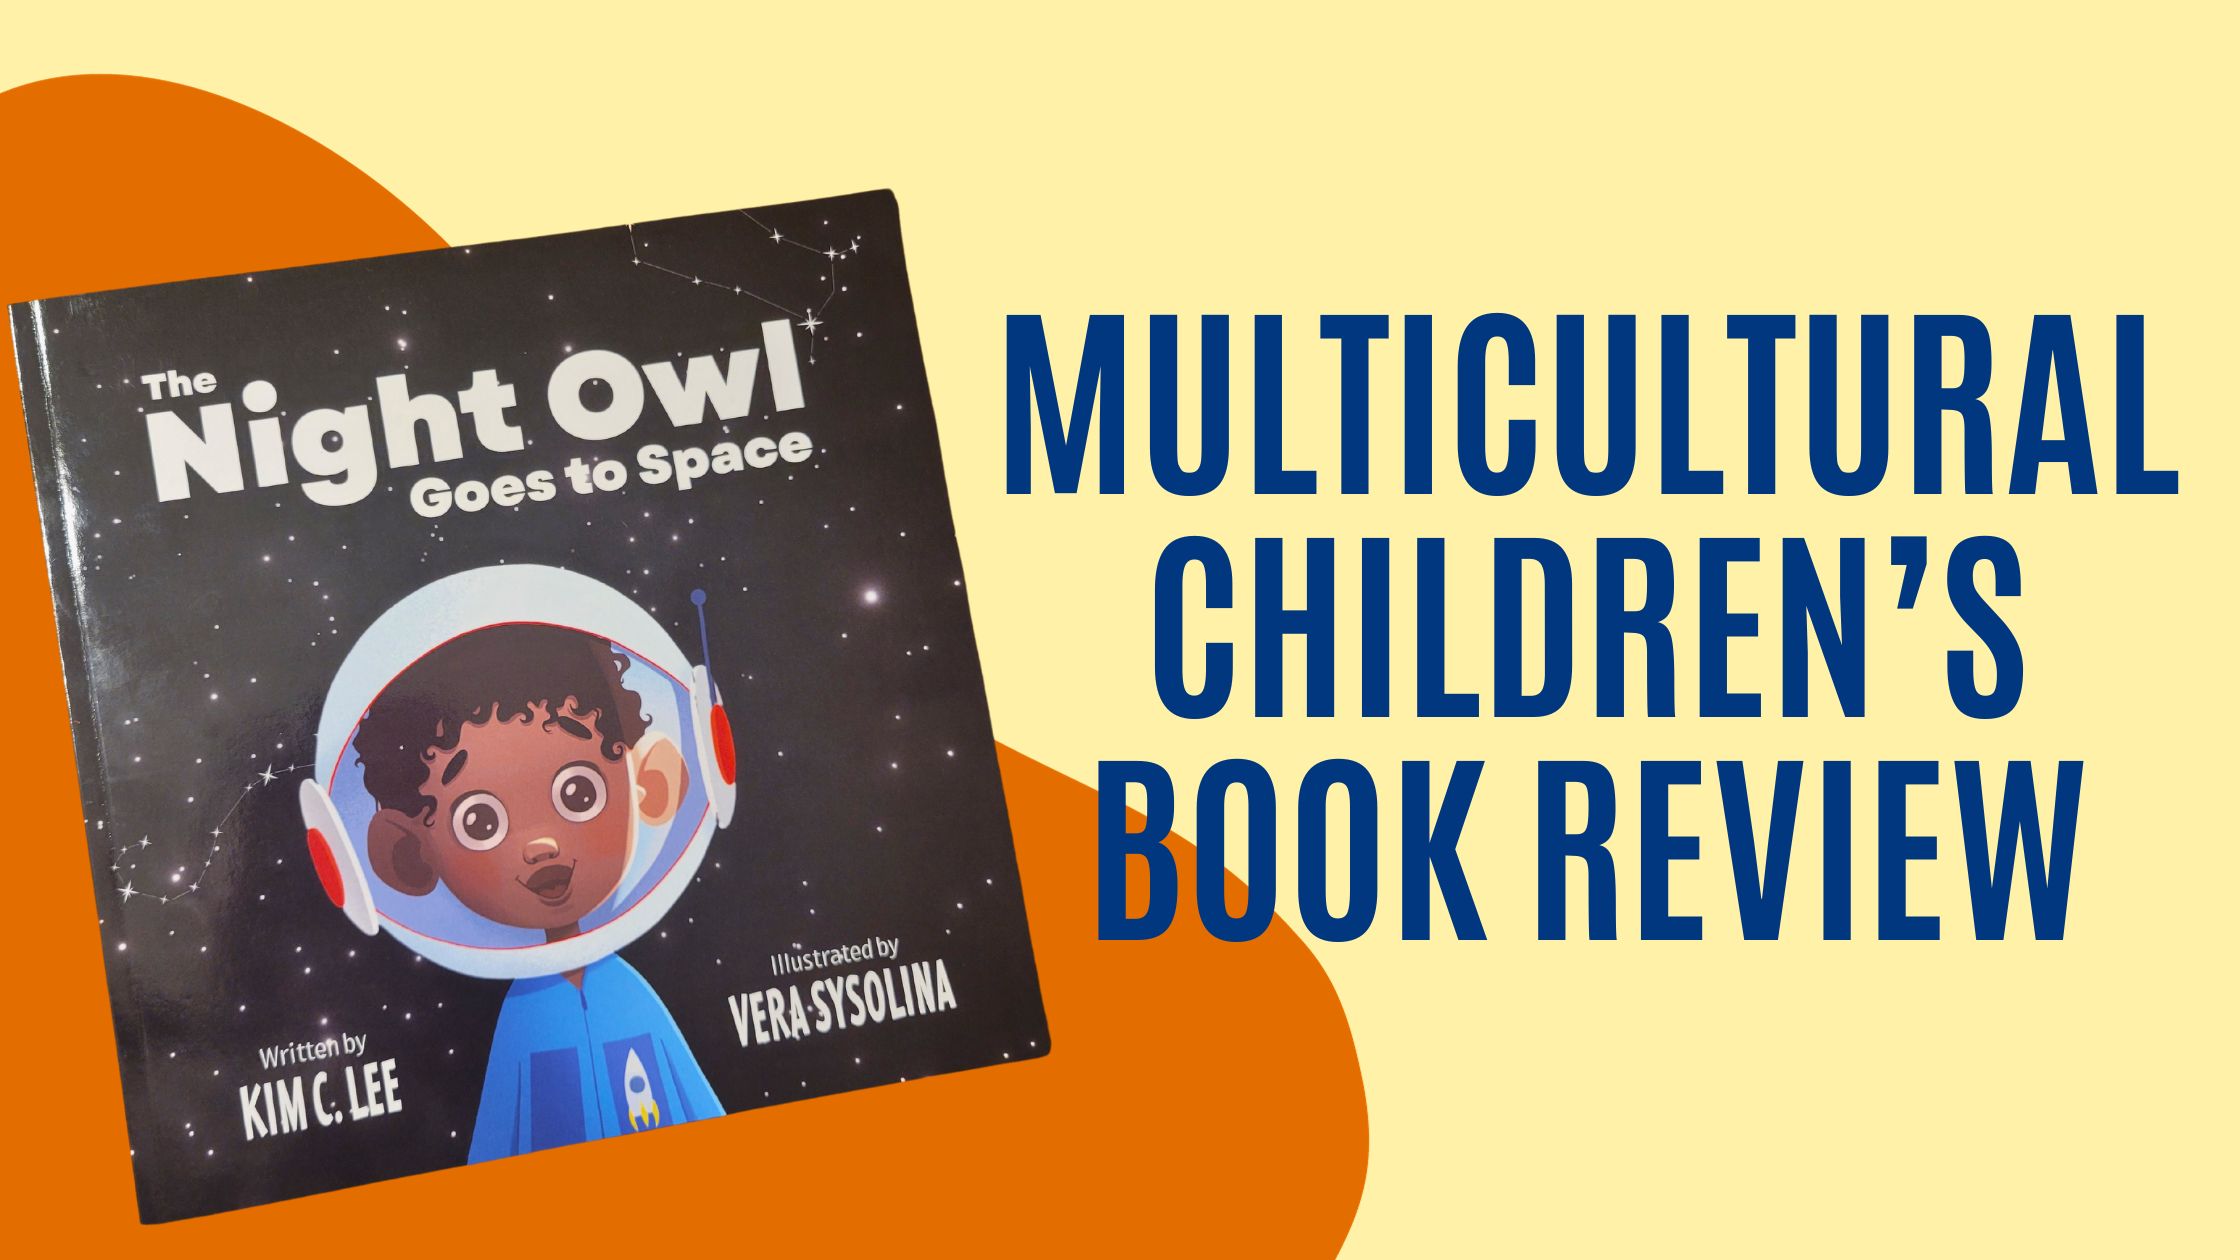 Picture of 'The Night Owl Goes to Space.' Text says Multicultural Children's Book Review